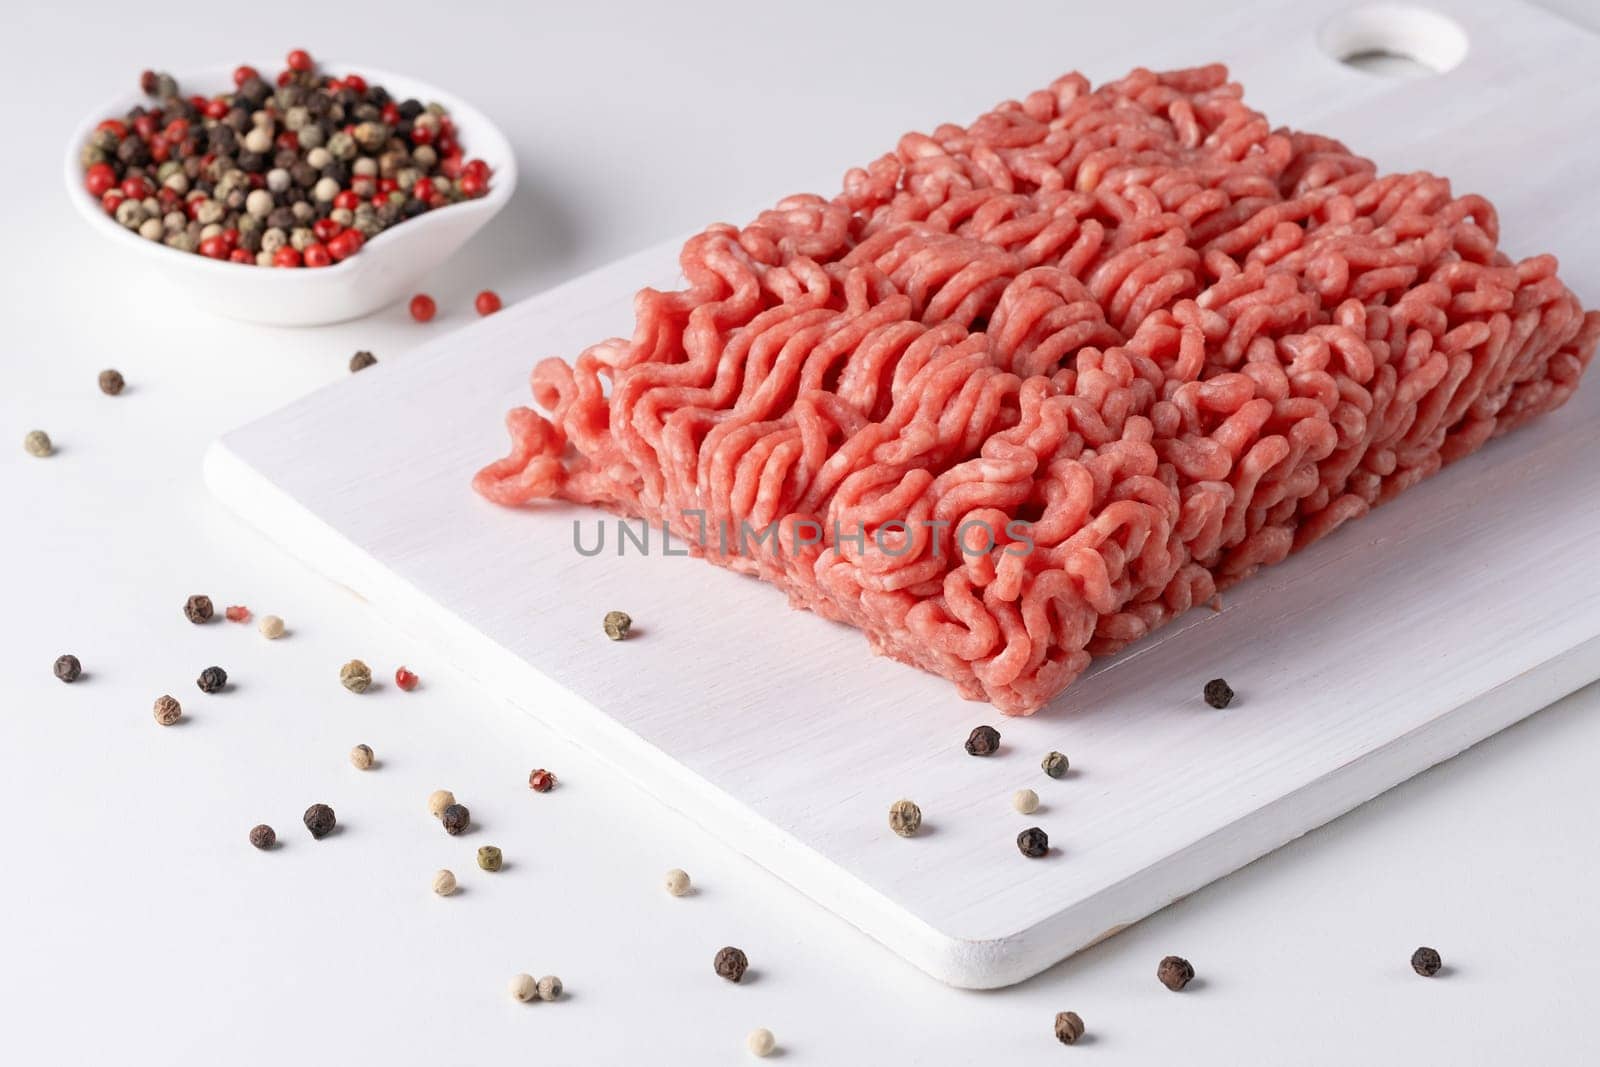 Fresh raw minced meat and peppers on a white table, close-up.